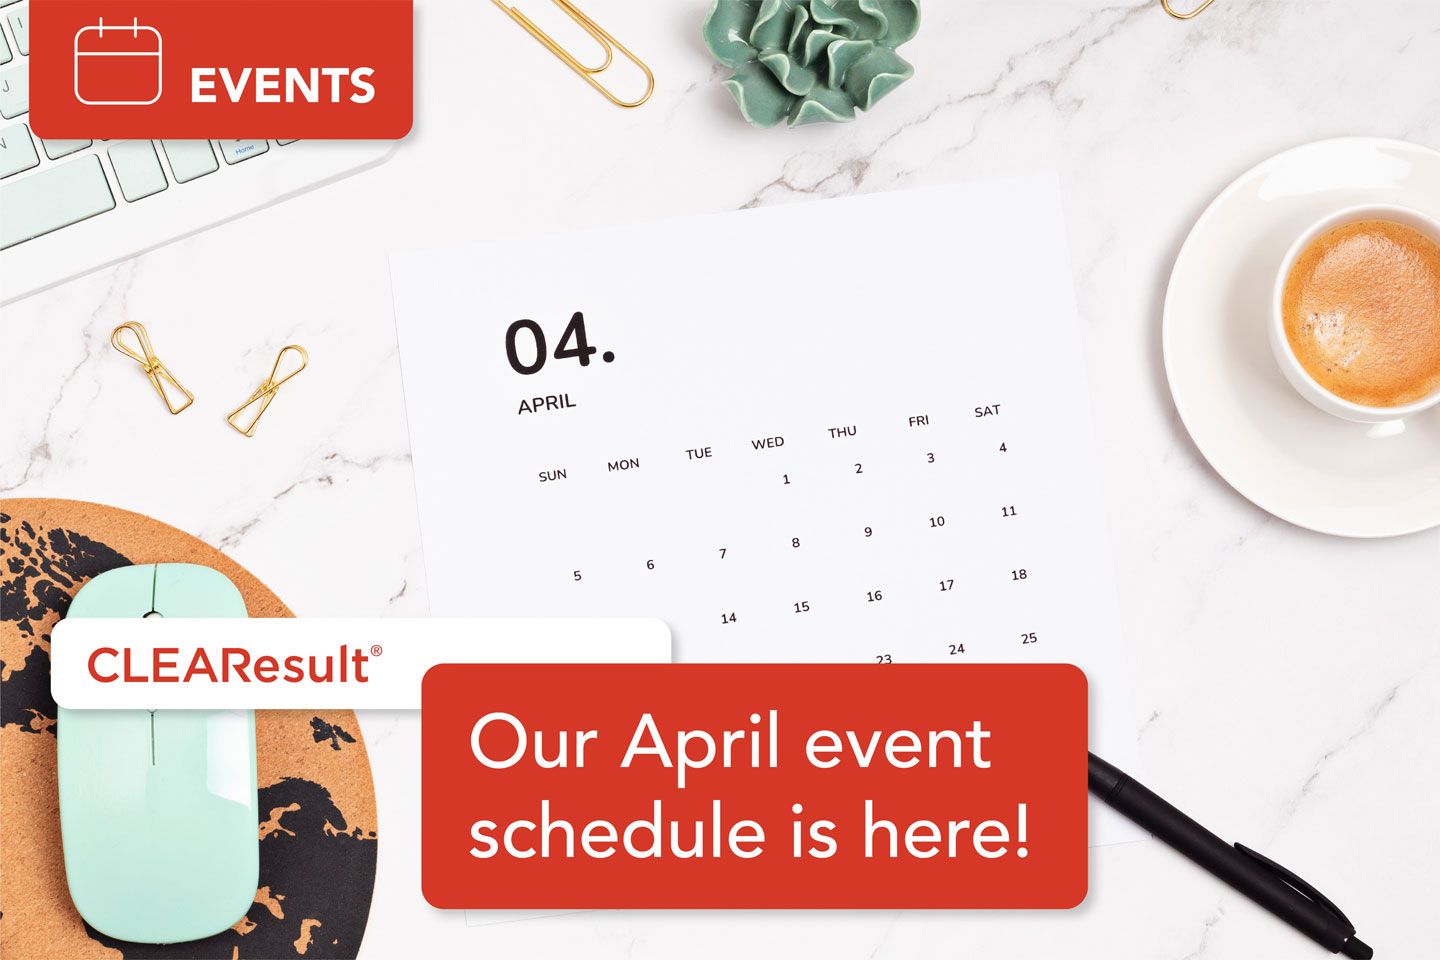 Our April event schedule is here!